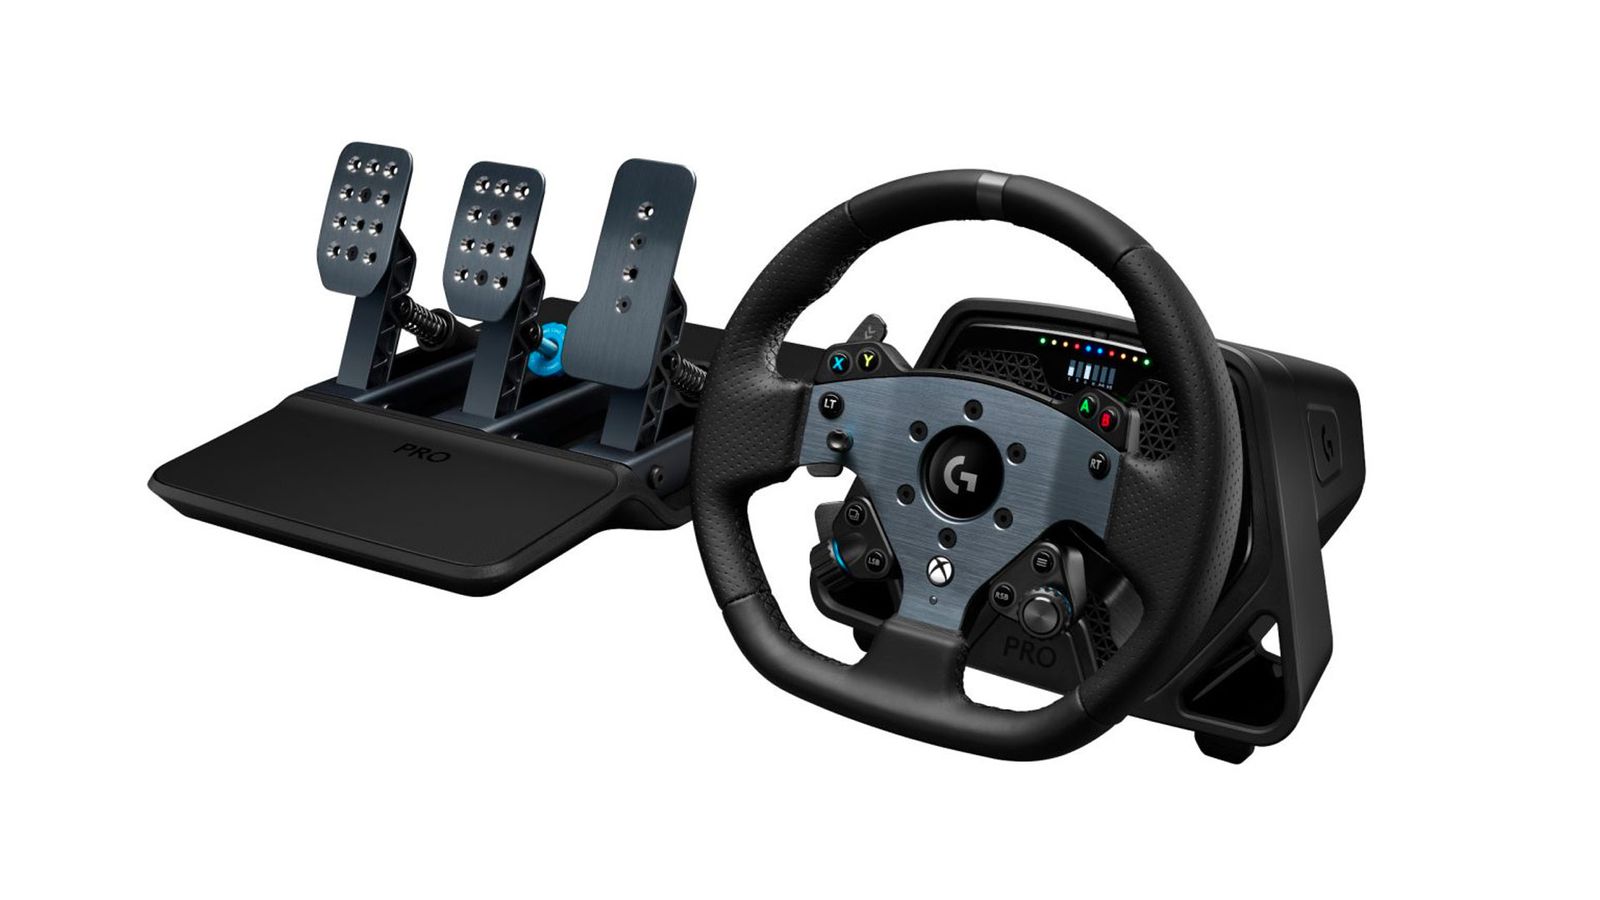 Logitech G PRO Racing Wheel product image next to PRO Pedals, both in black.